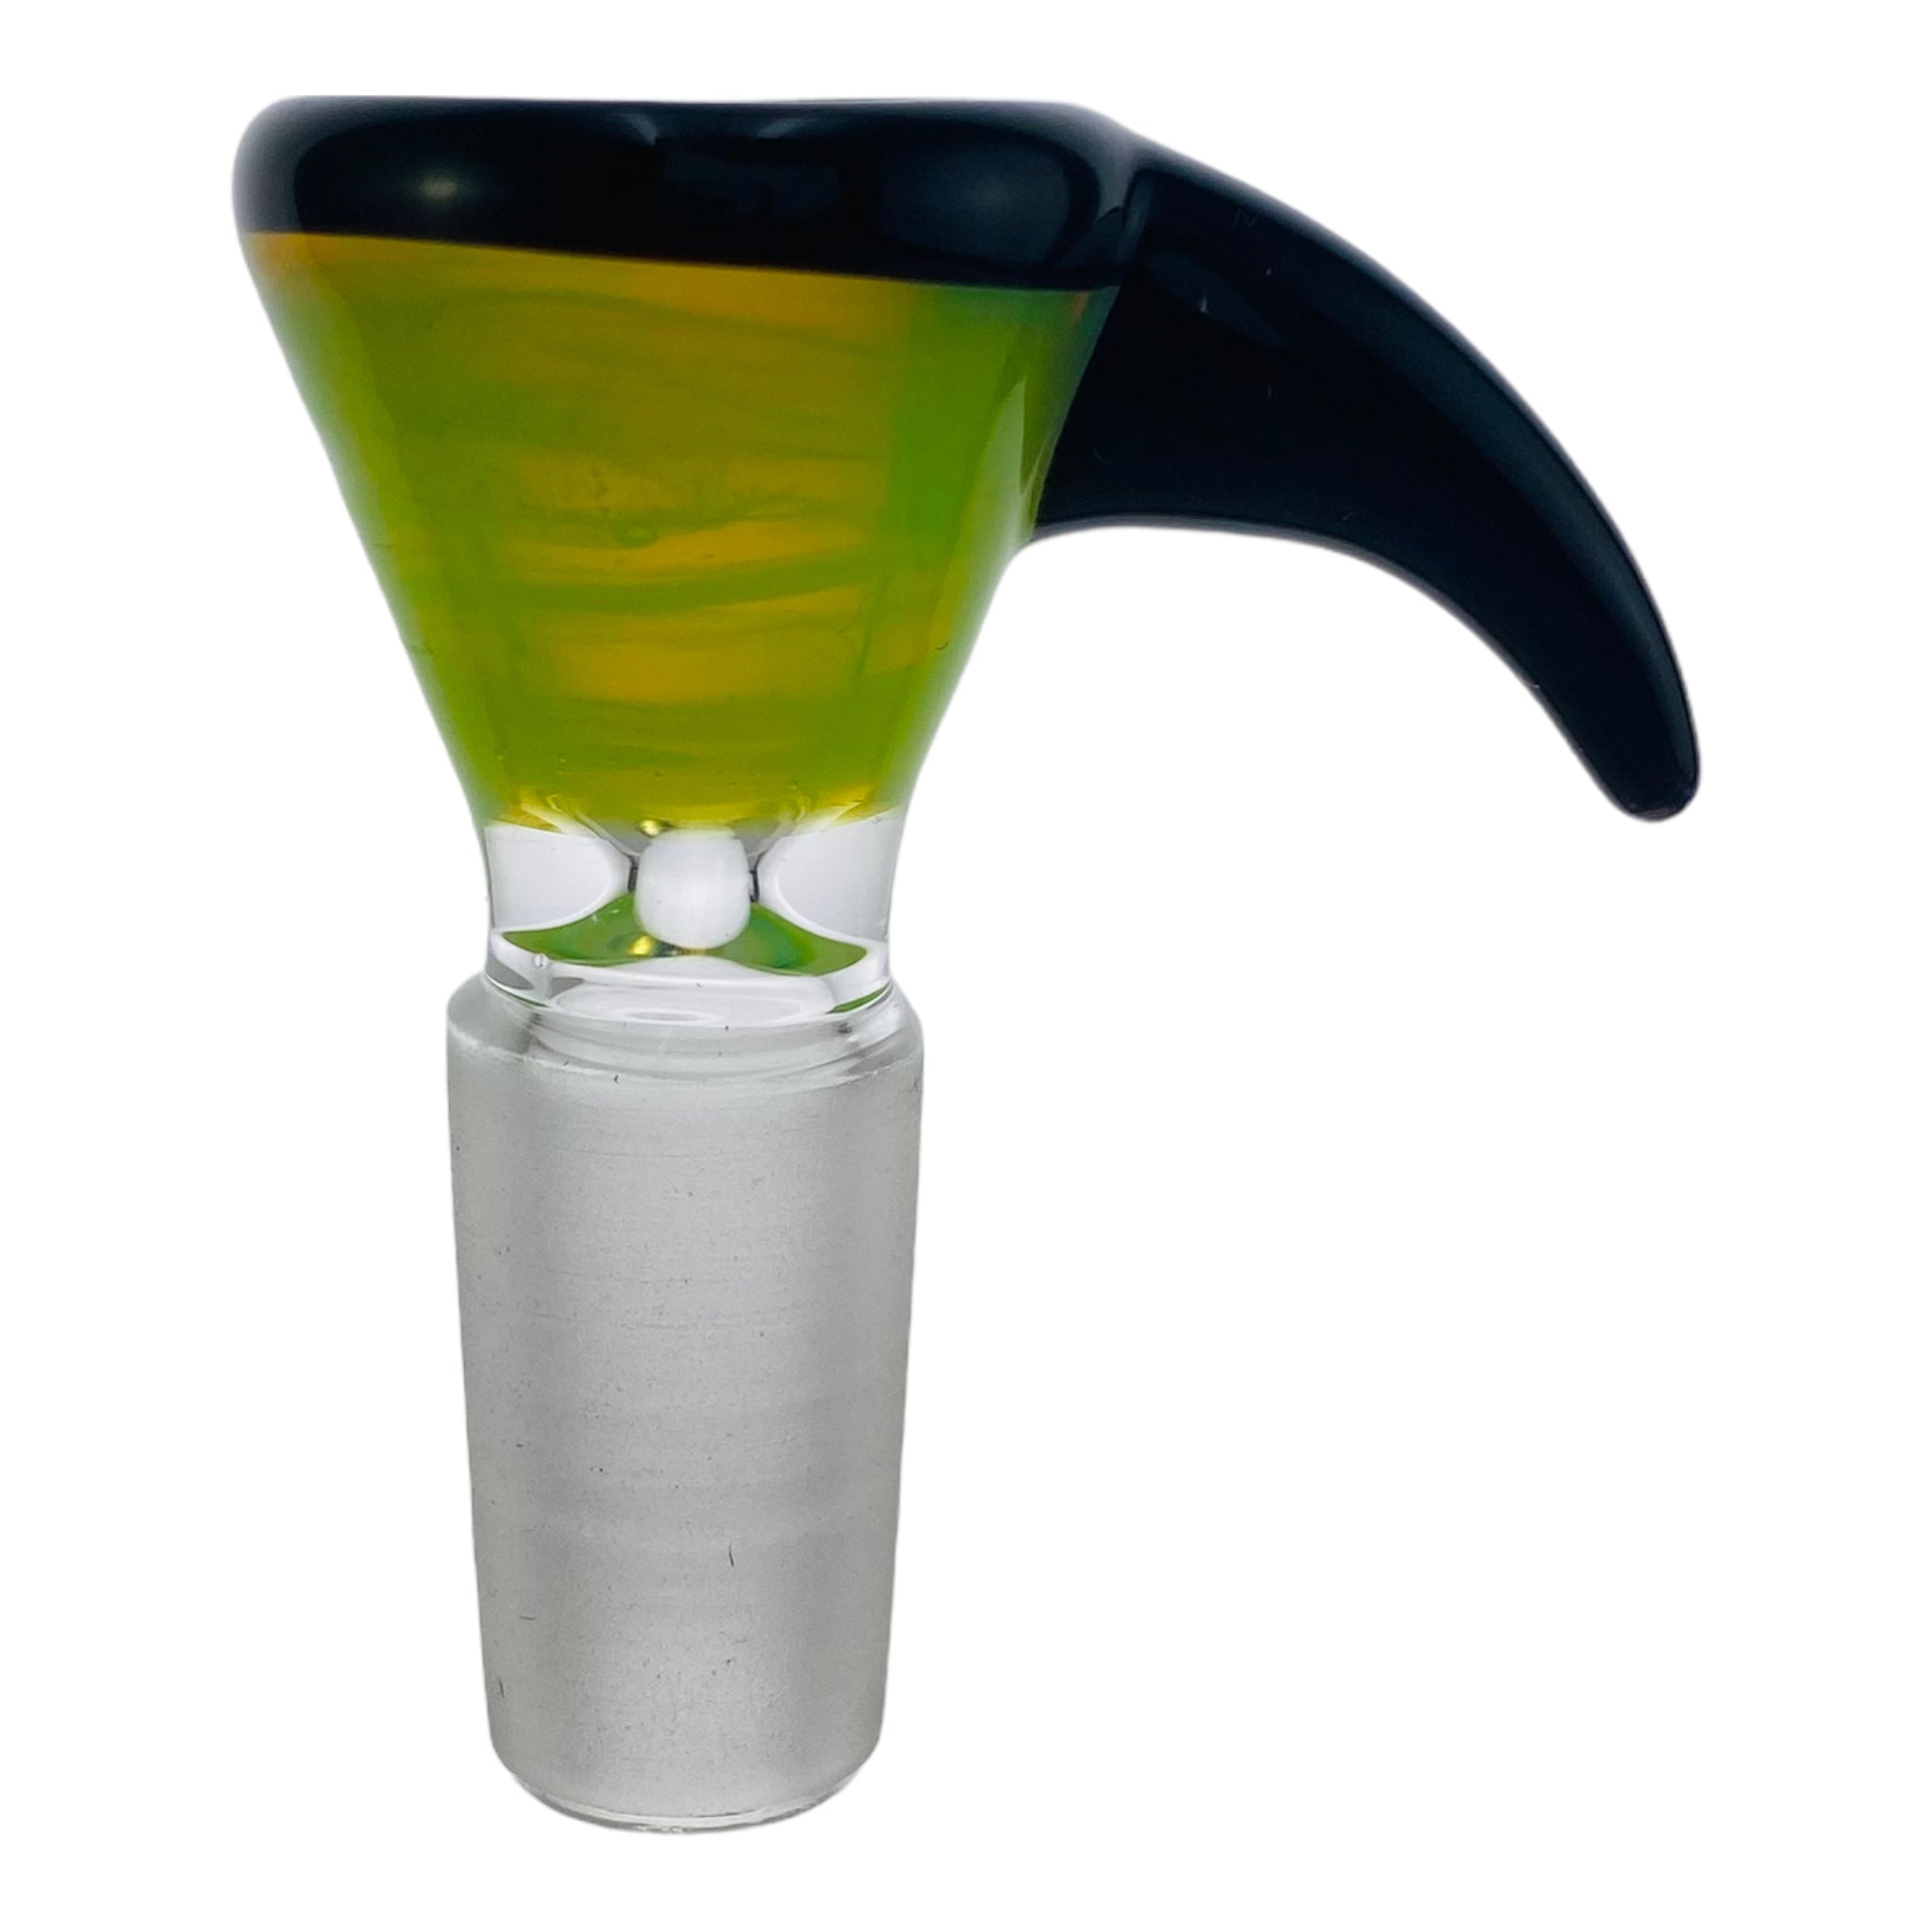 14mm Flower Bowl - Green Funnel With Black Handle Bong Bowl Piece